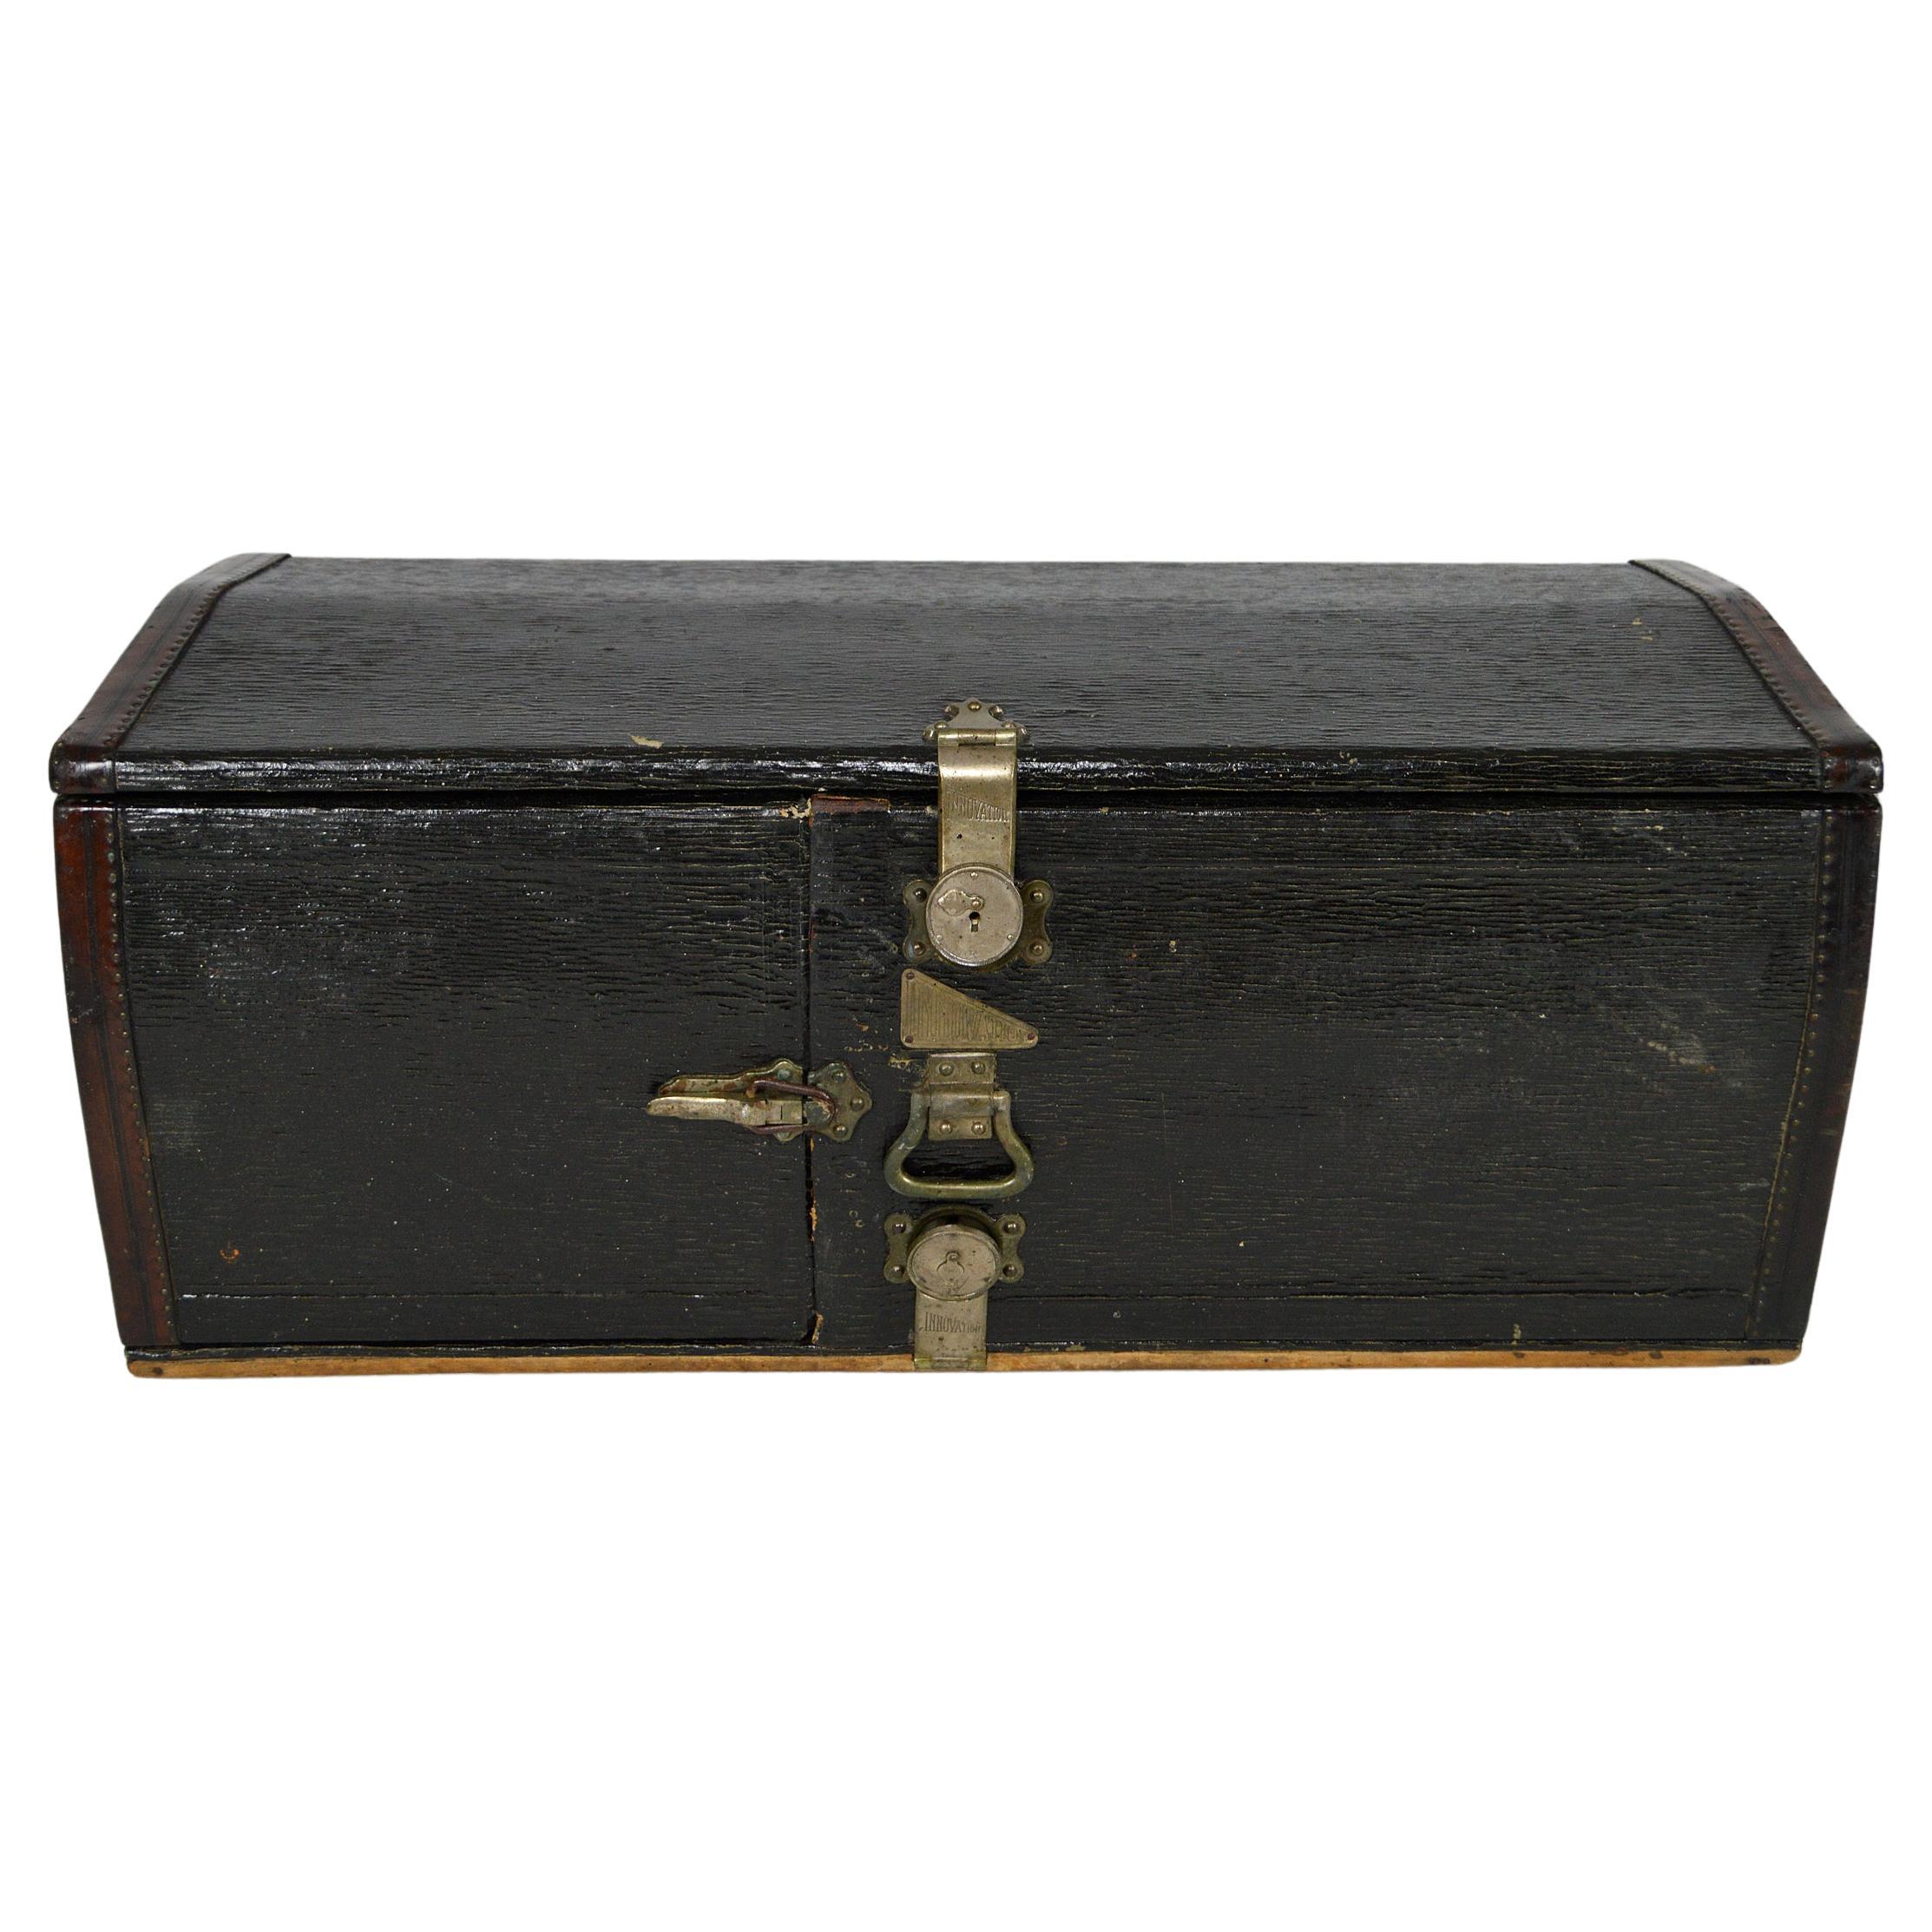 Automobile Trunk by Innovation, France, circa 1920